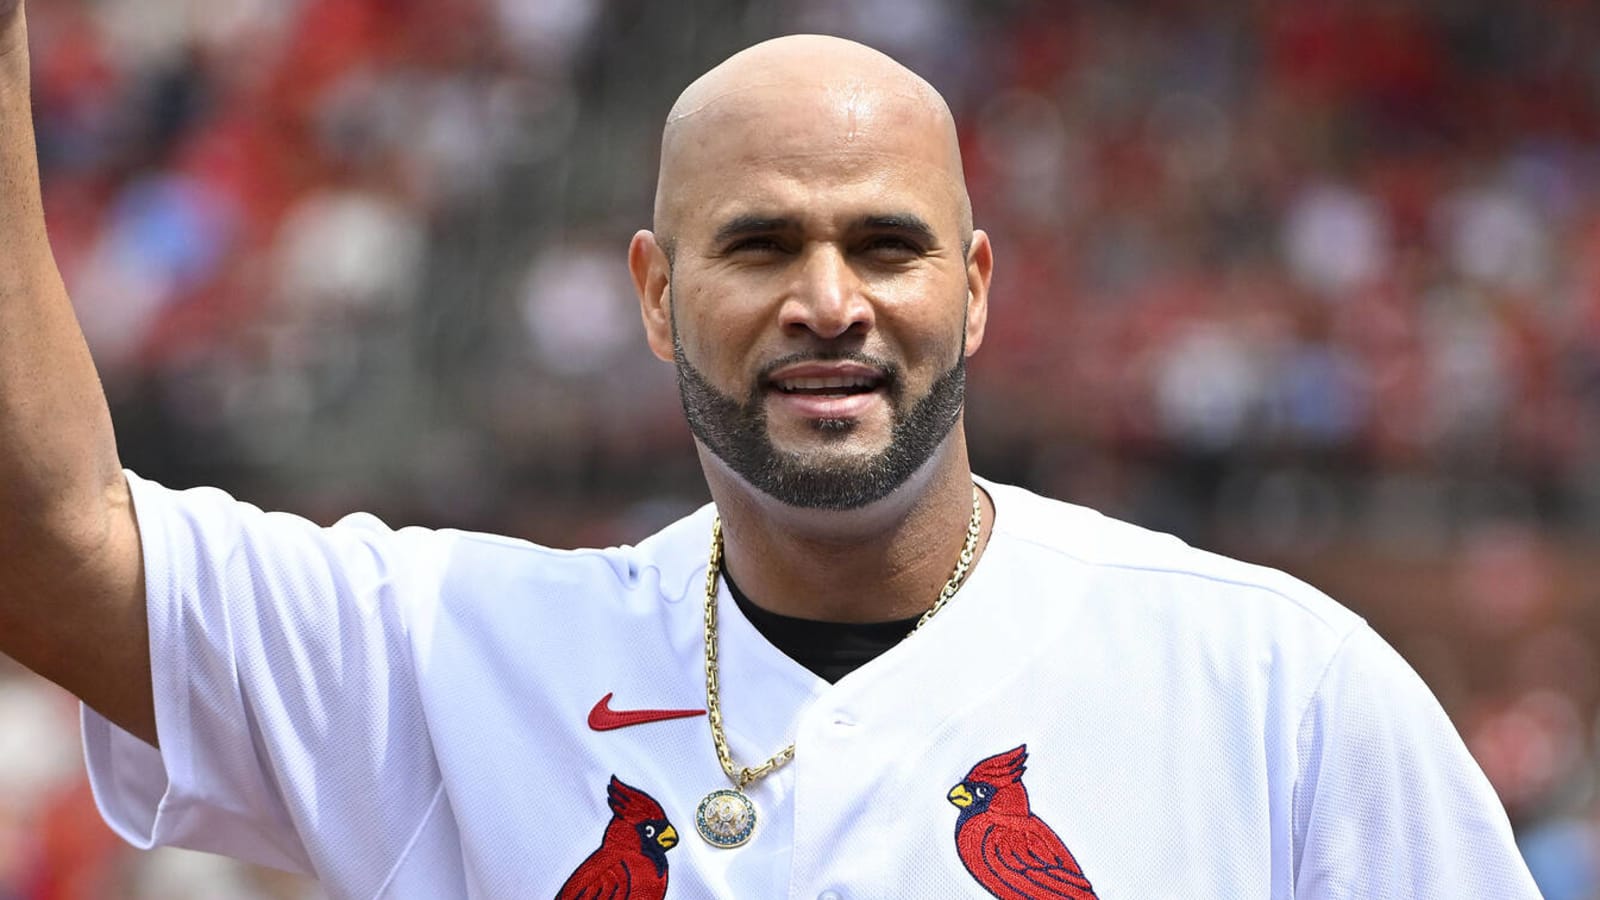 Pujols hits pinch-hit grand slam to reach 690 career HRs